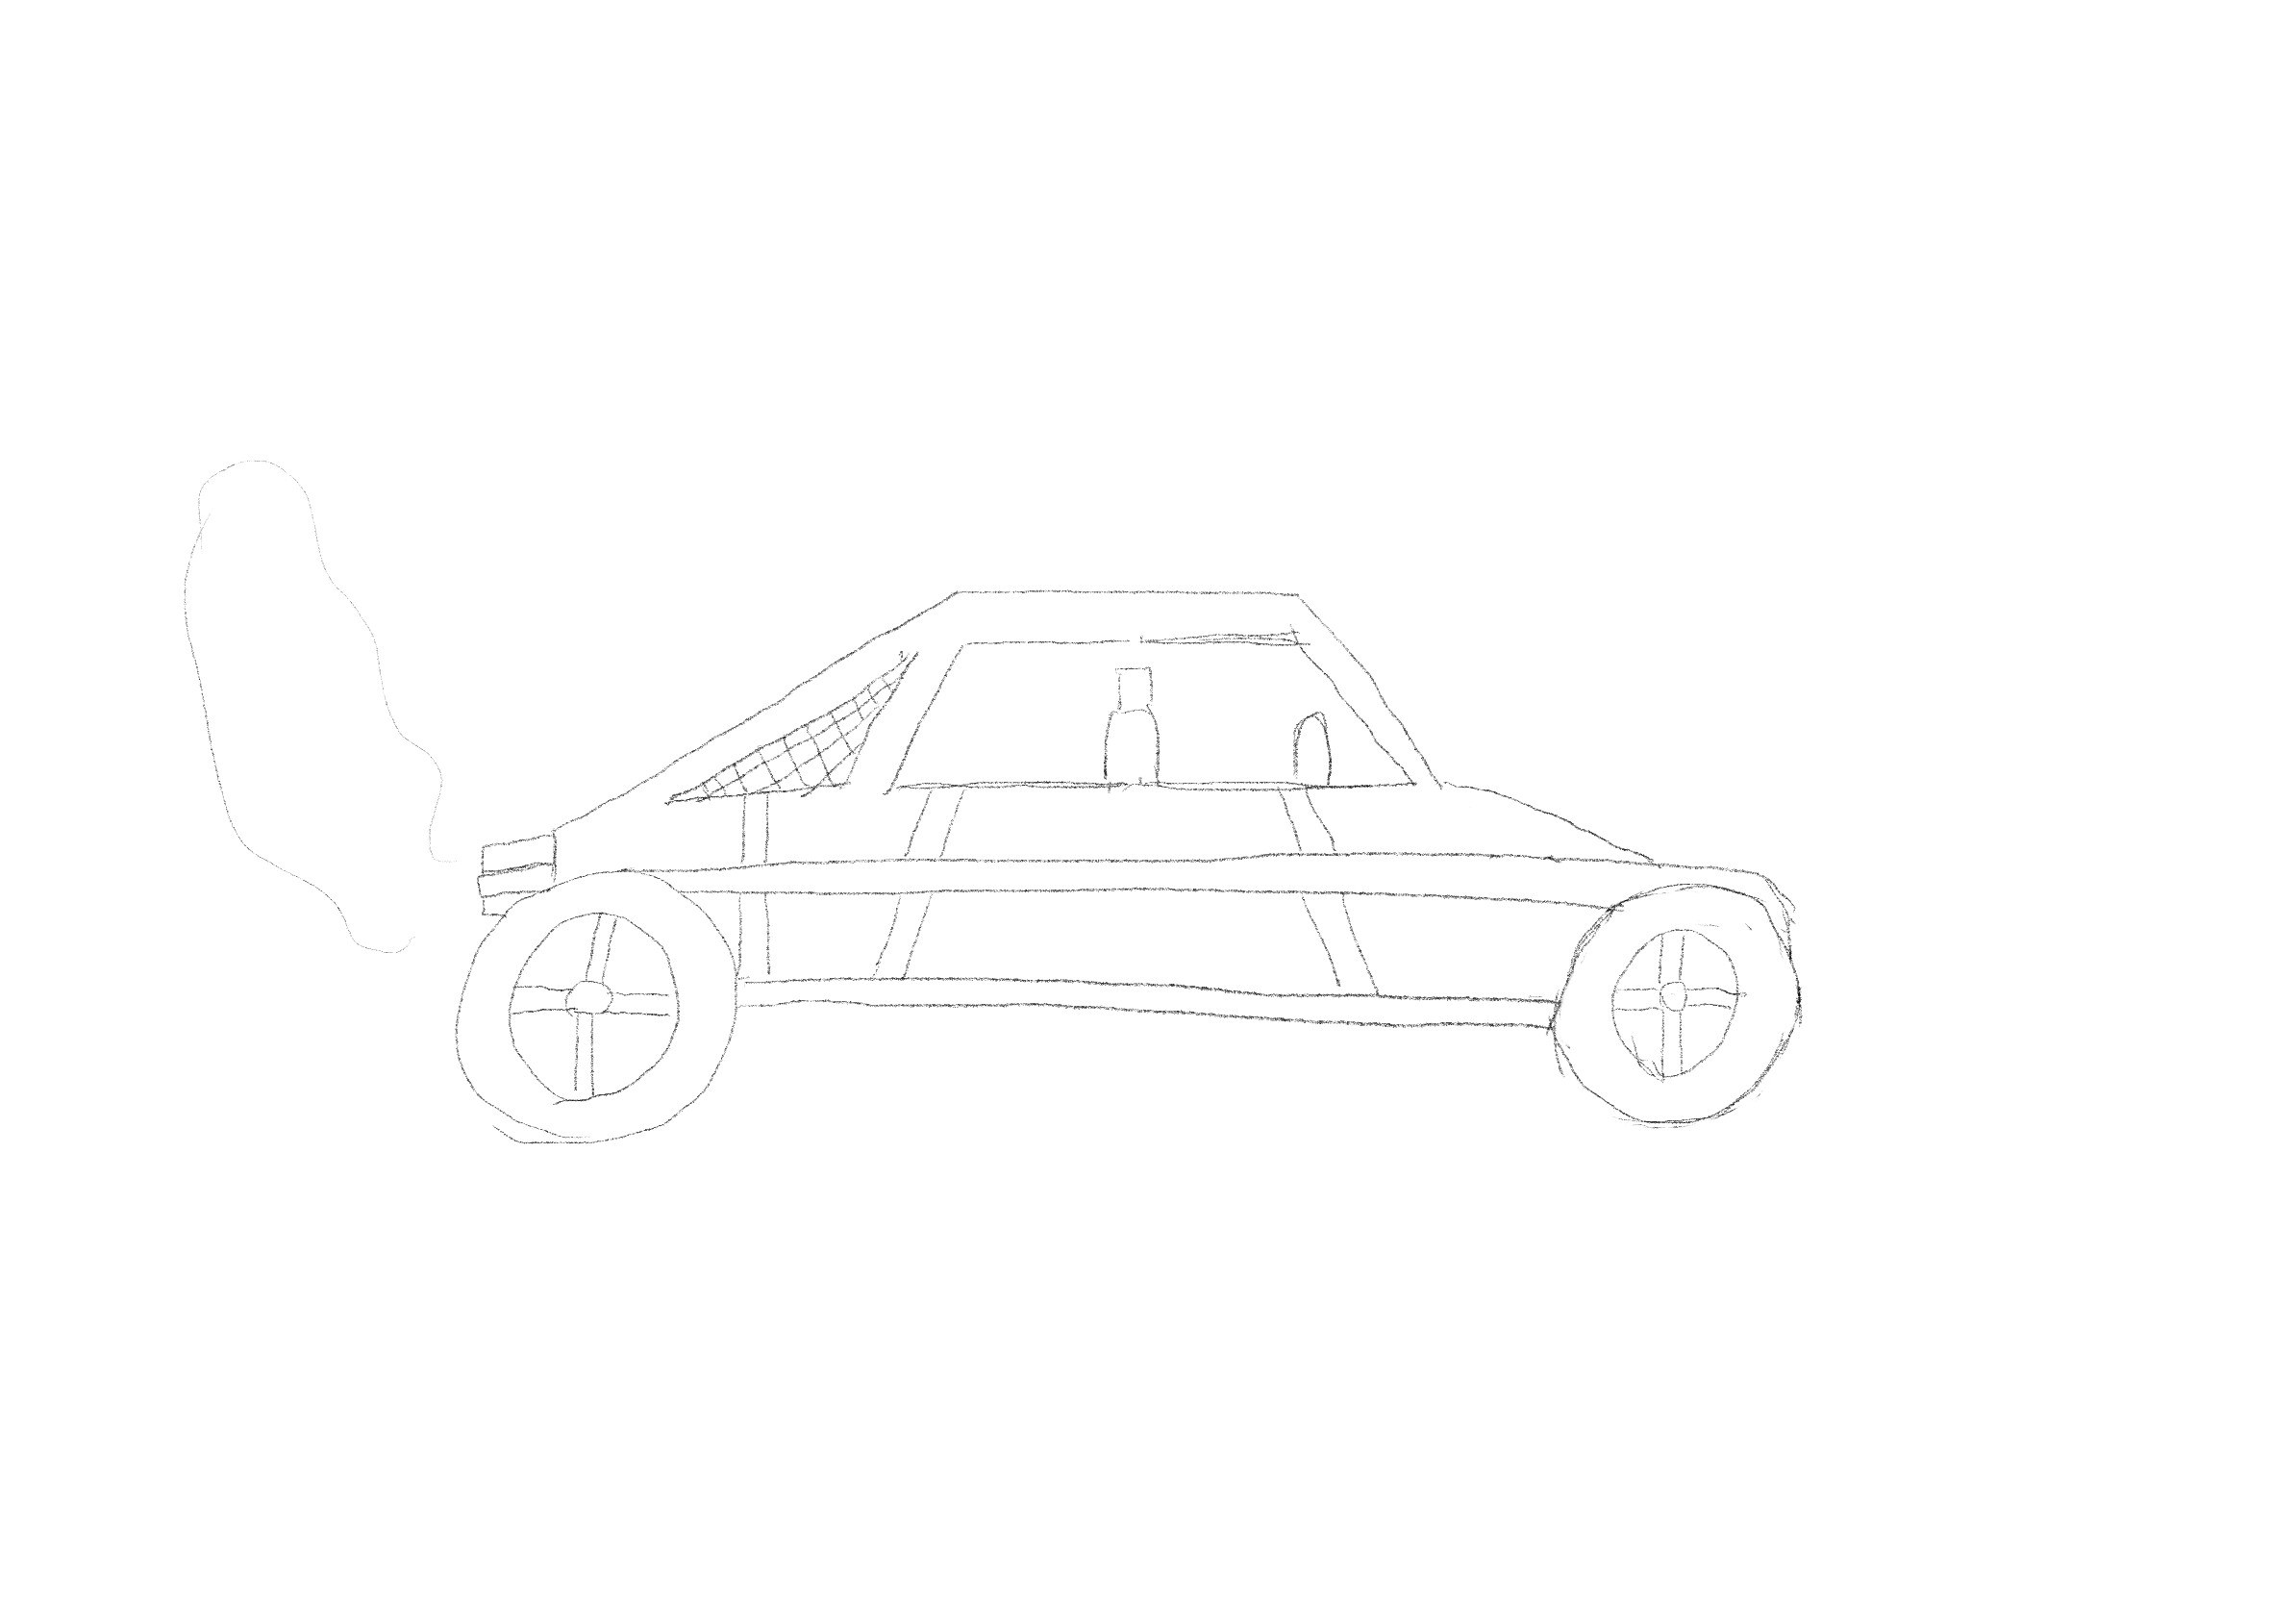 This Game Let's You Draw Your Own Car to Complete Challenges